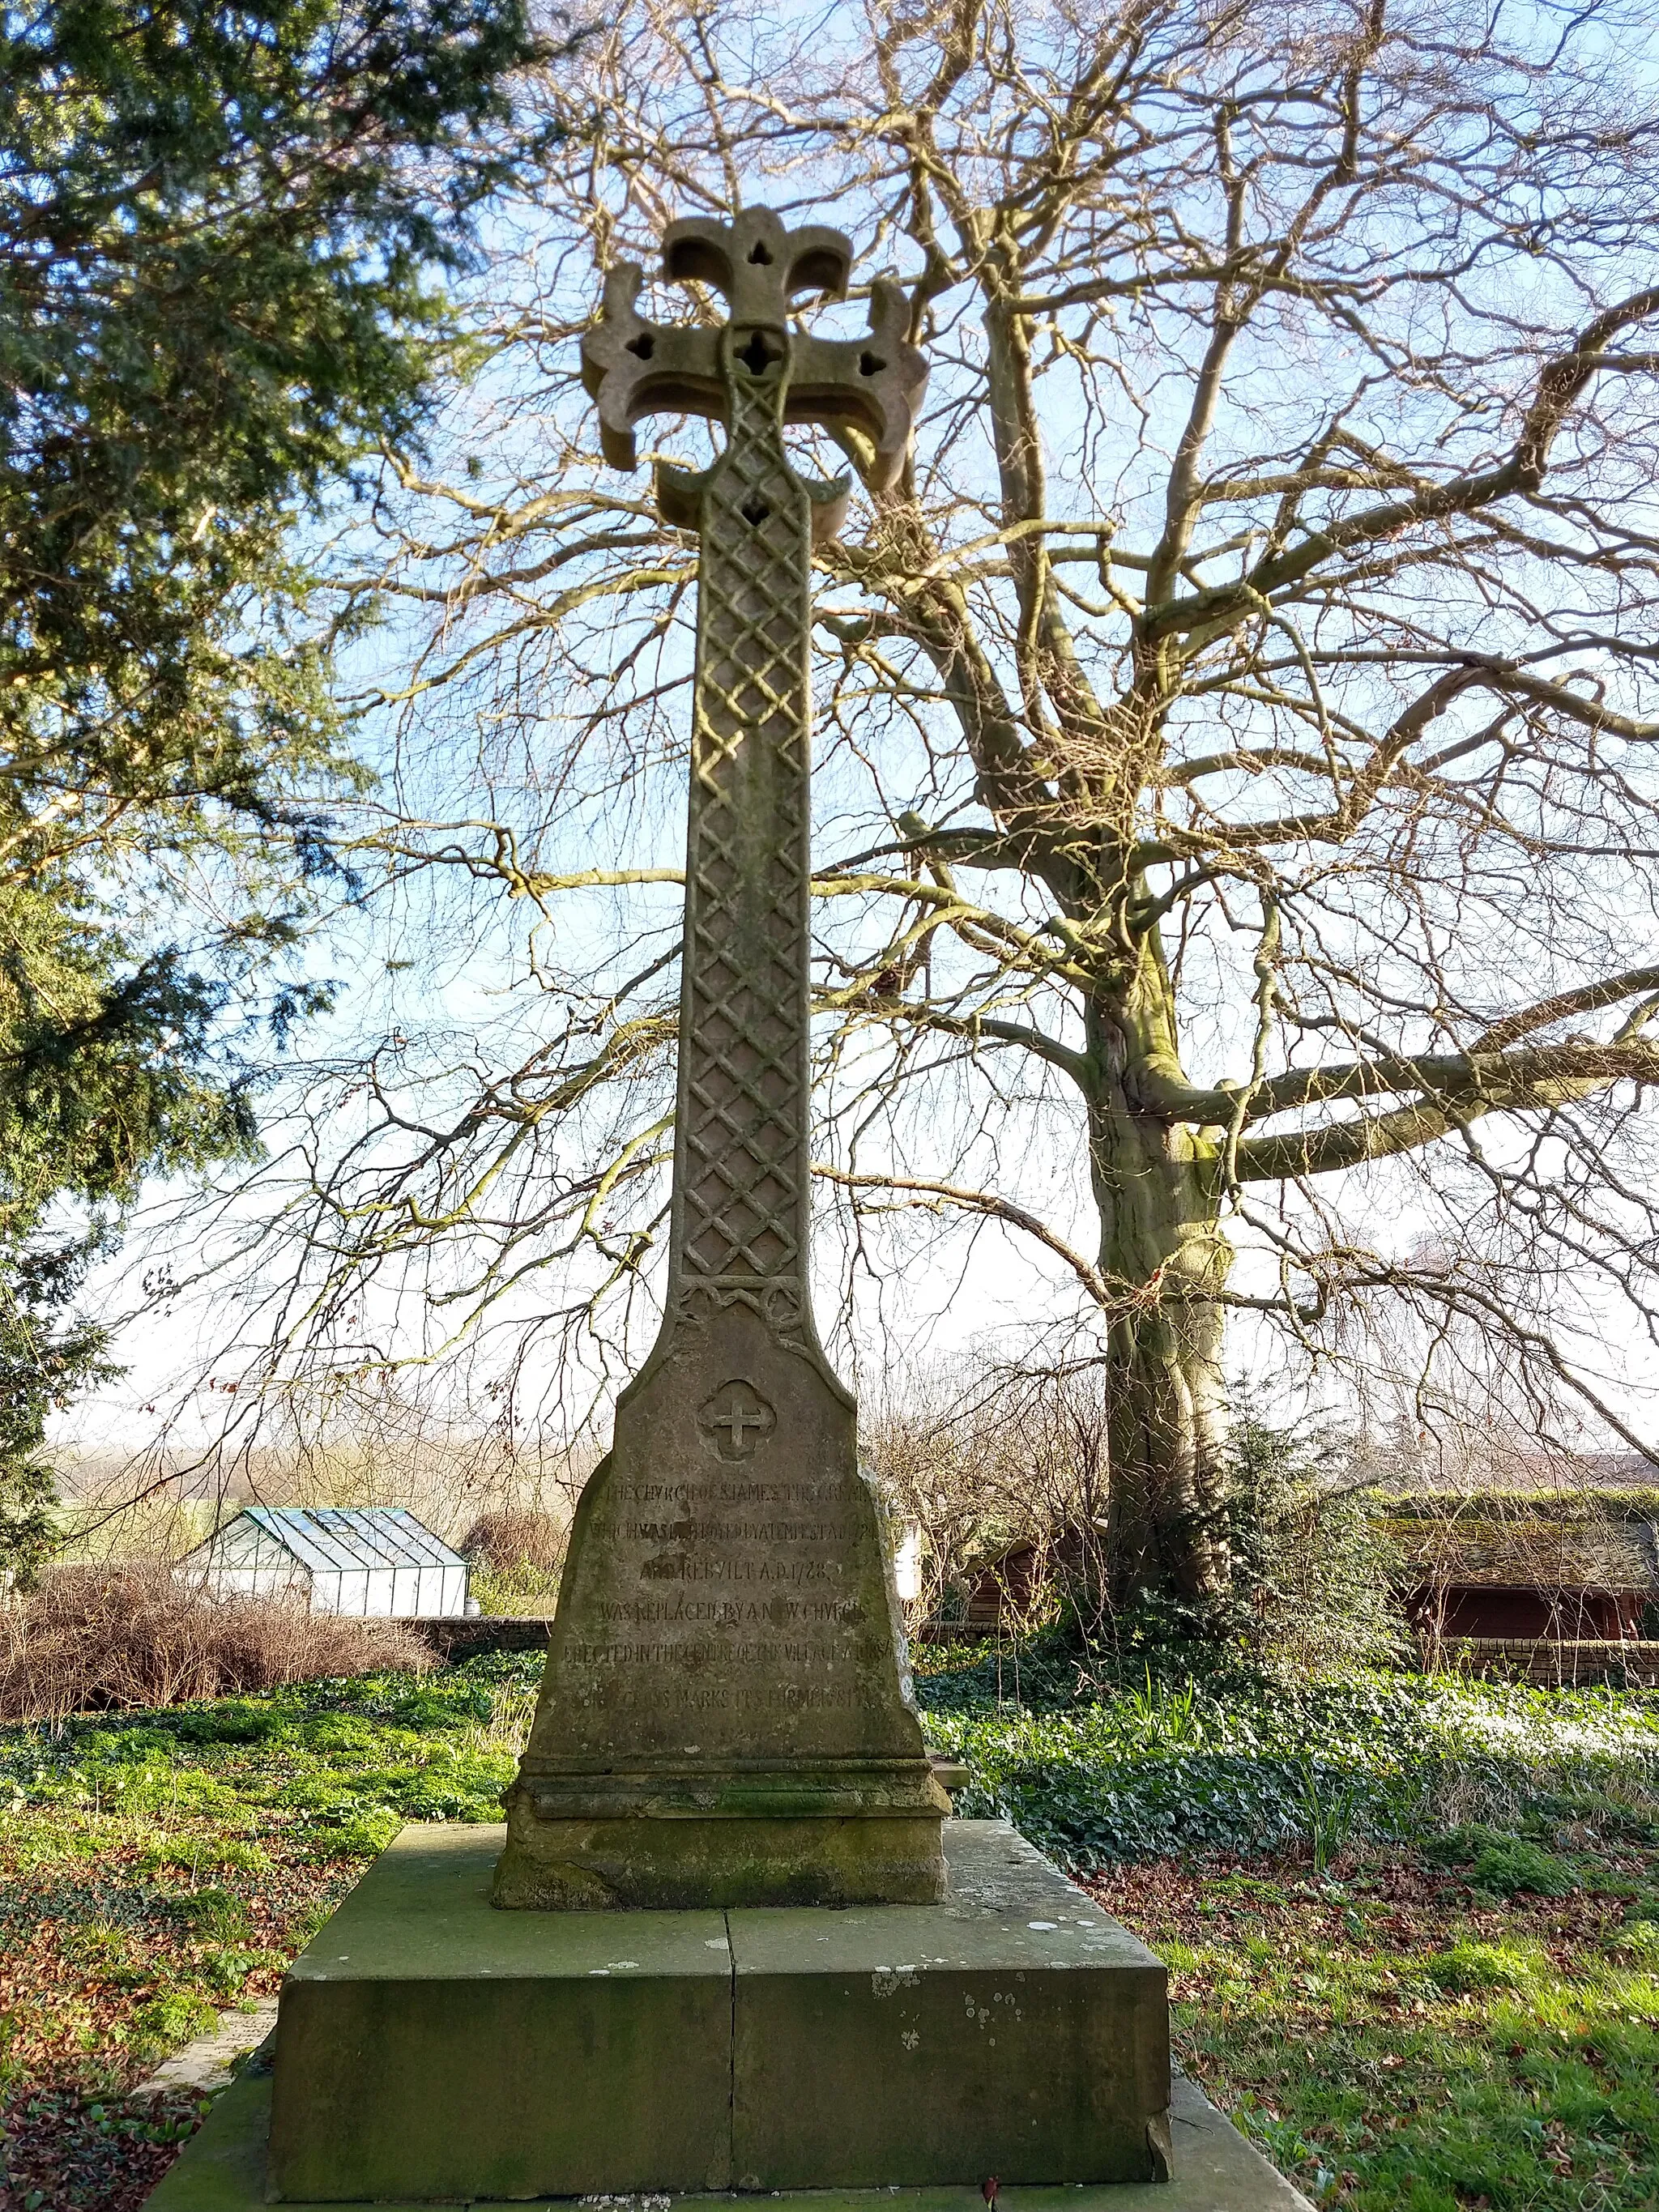 Photo showing: cross showing the location of the former Church of St James, in the Old Churchyard, Vicarage Road, Waresley, Huntingdonshire. Inscription reads "The Church of St James the Great, which was destroyed by a tempest AD 1724 and rebuilt AD 1728 was replaced by a new church erected in the centre of the village AD 1856. This cross marks its former site."